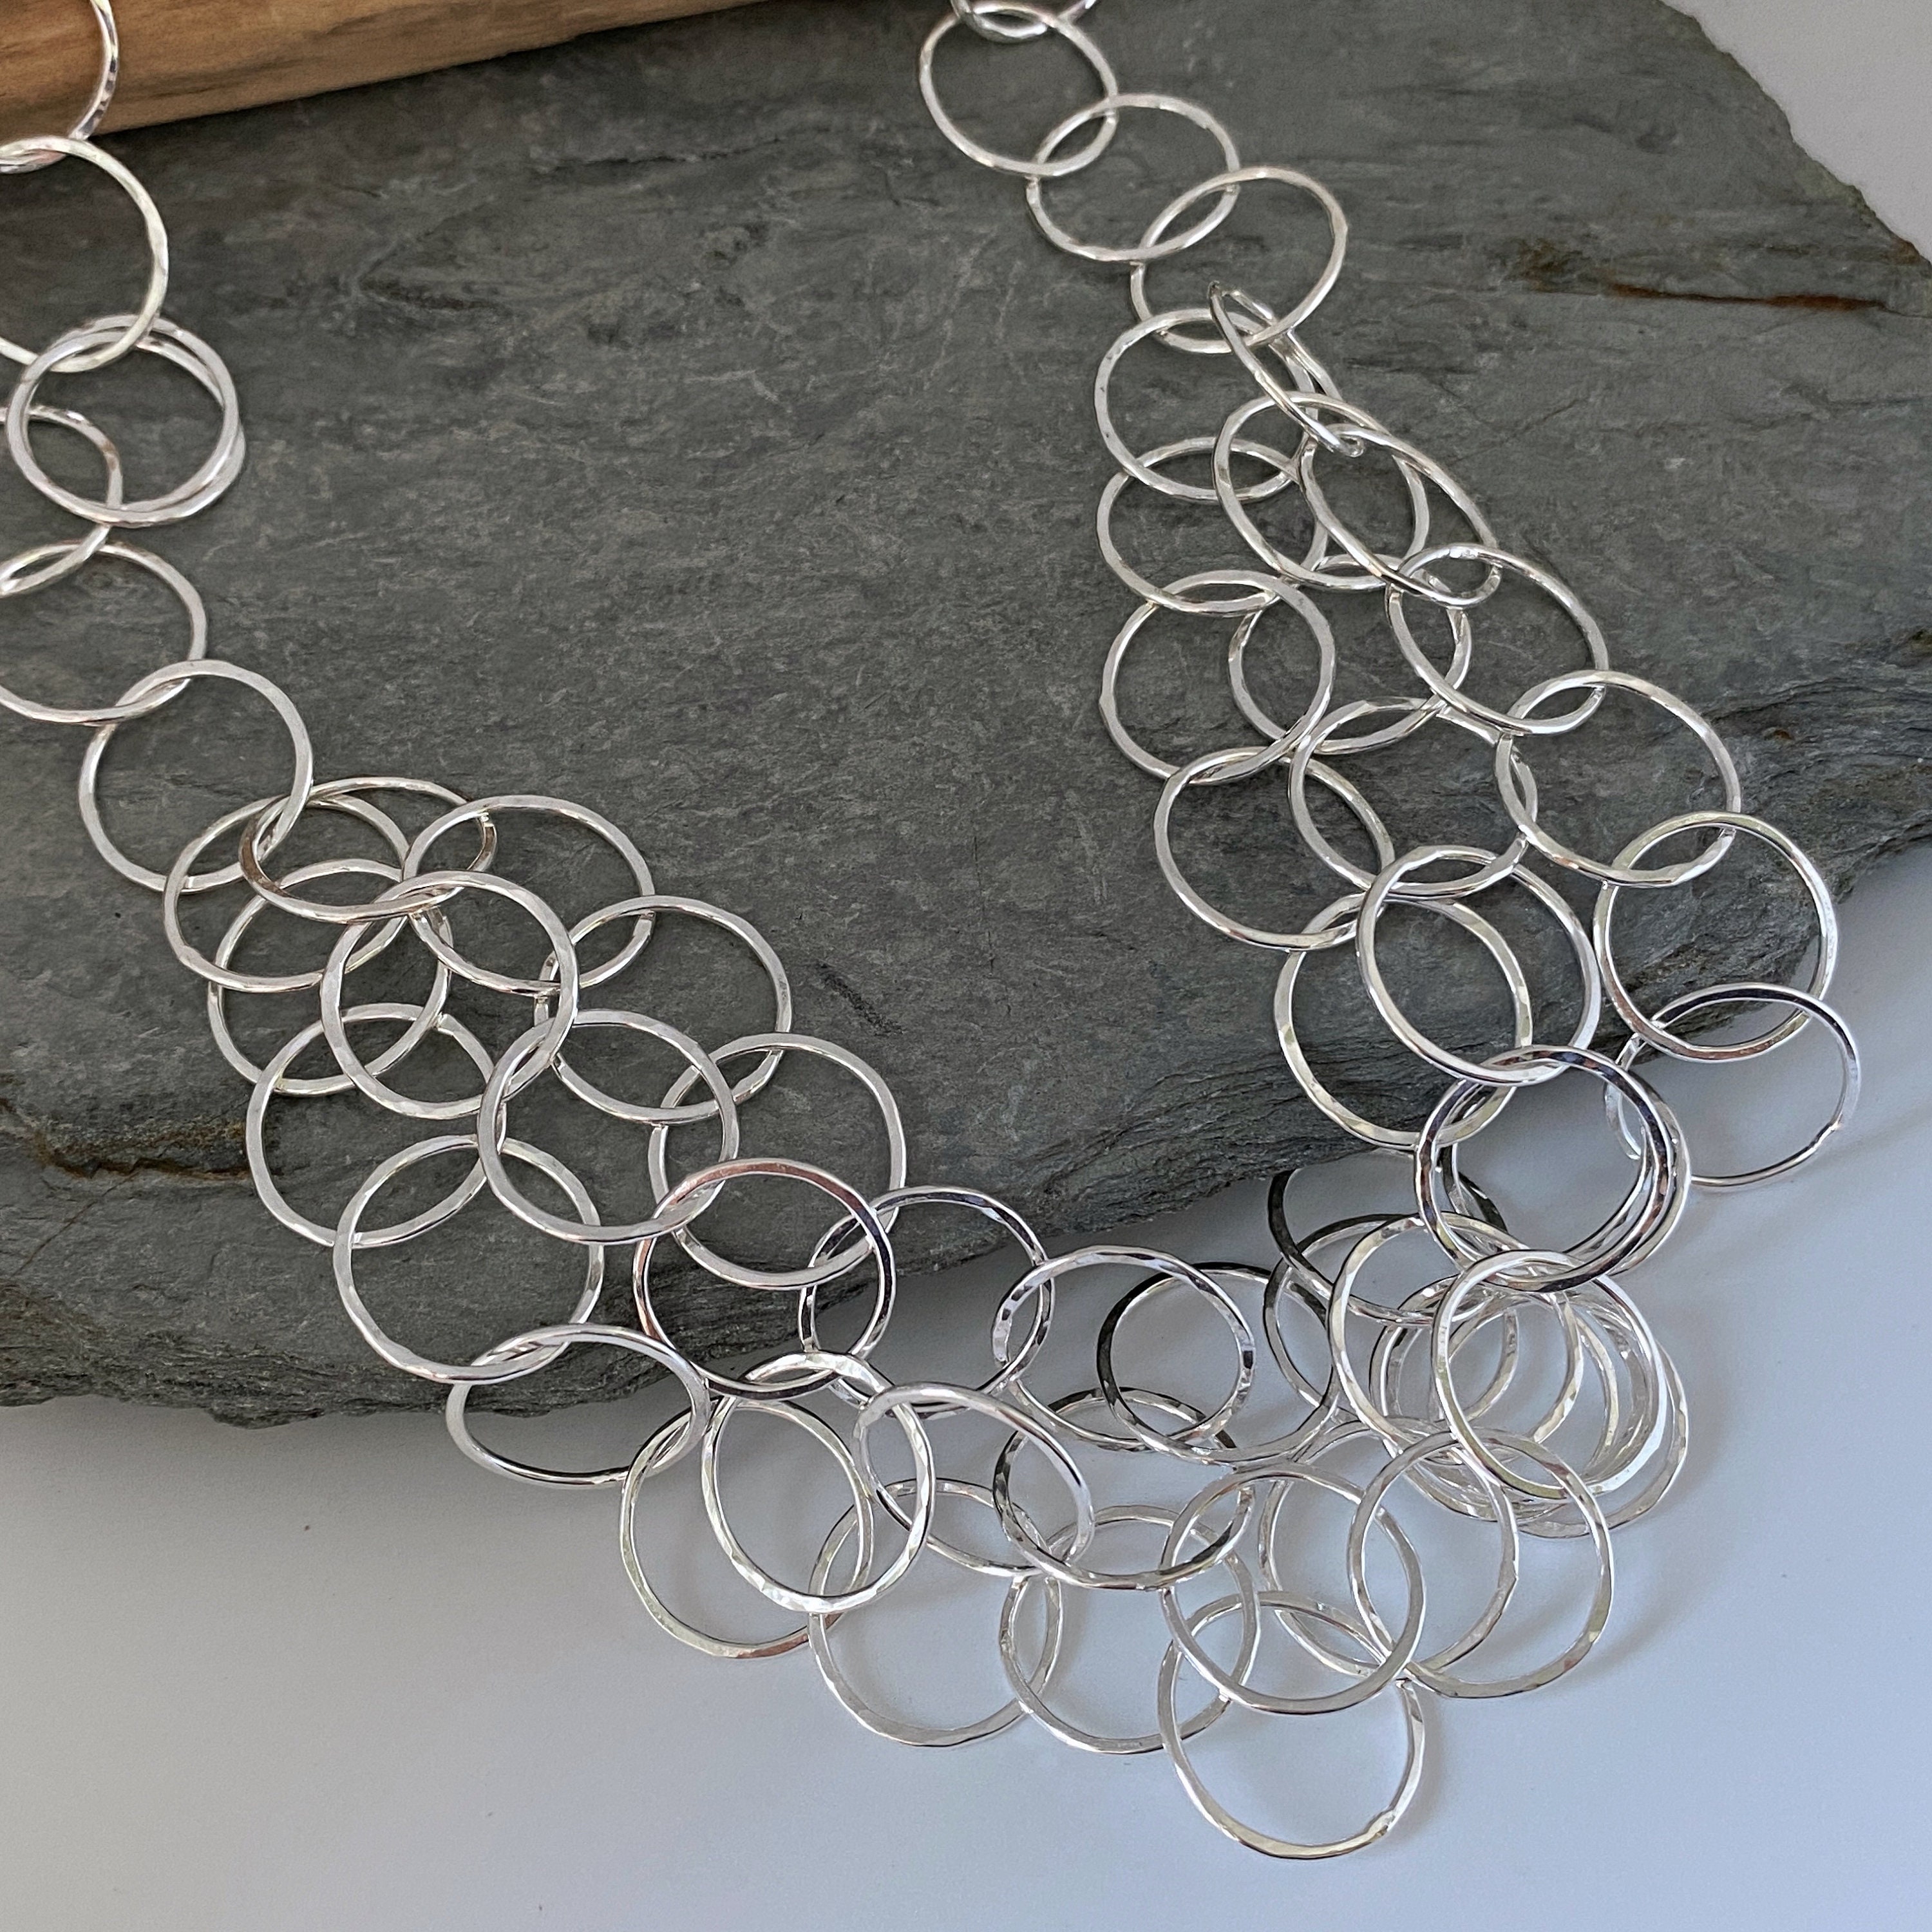 Short Three Layer Chain Necklace Made From Round Links With A Sparkly Hammered Finish. Handmade Silver Necklace. Unique